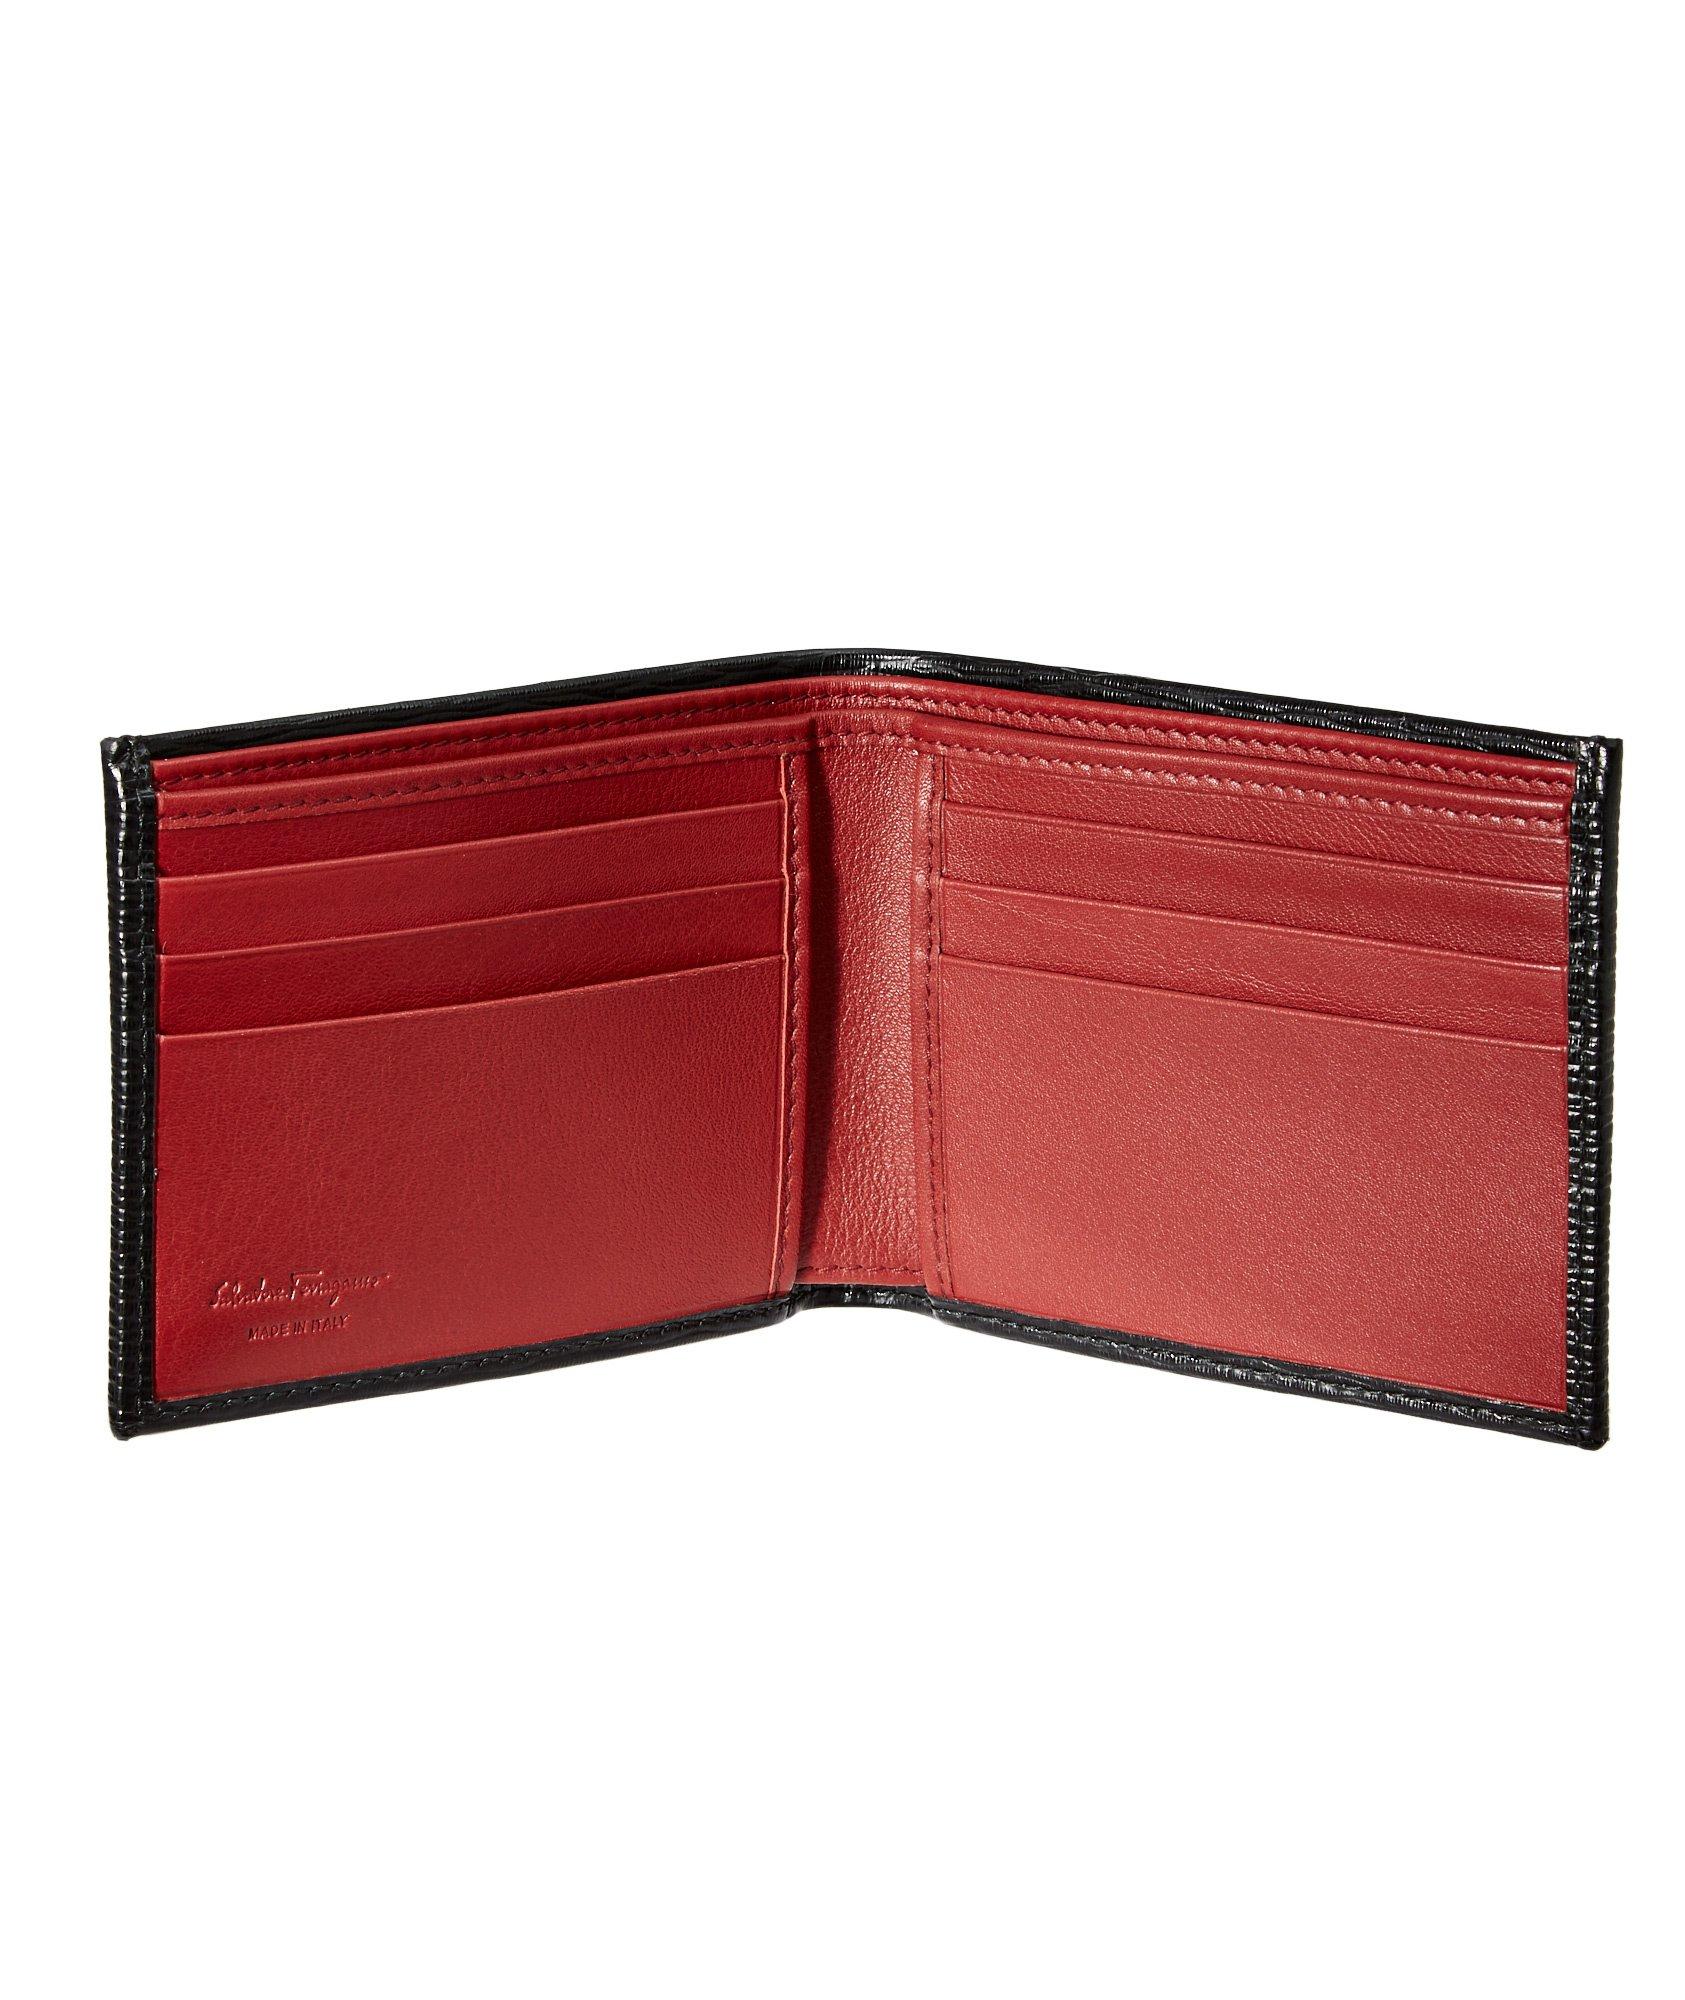 Leather Wallet image 1